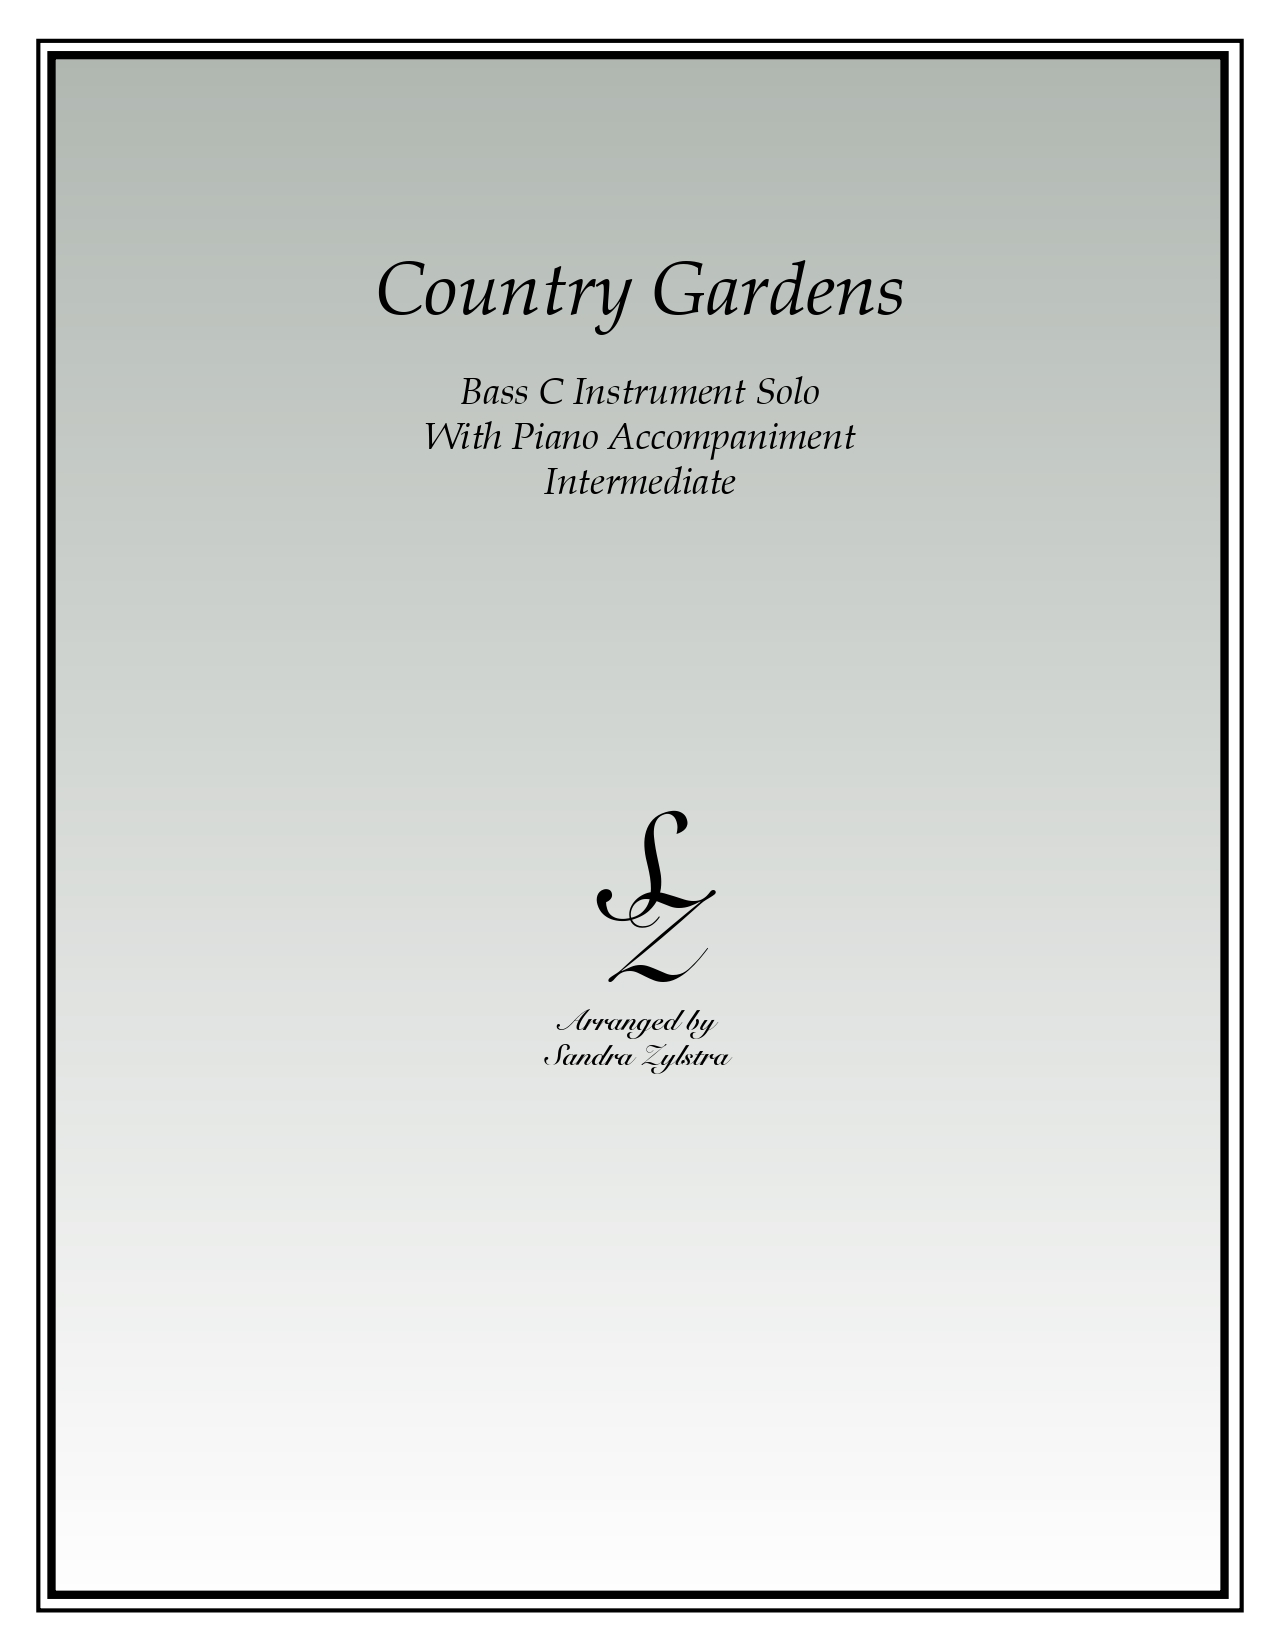 Country Gardens bass C instrument solo part cover page 00011